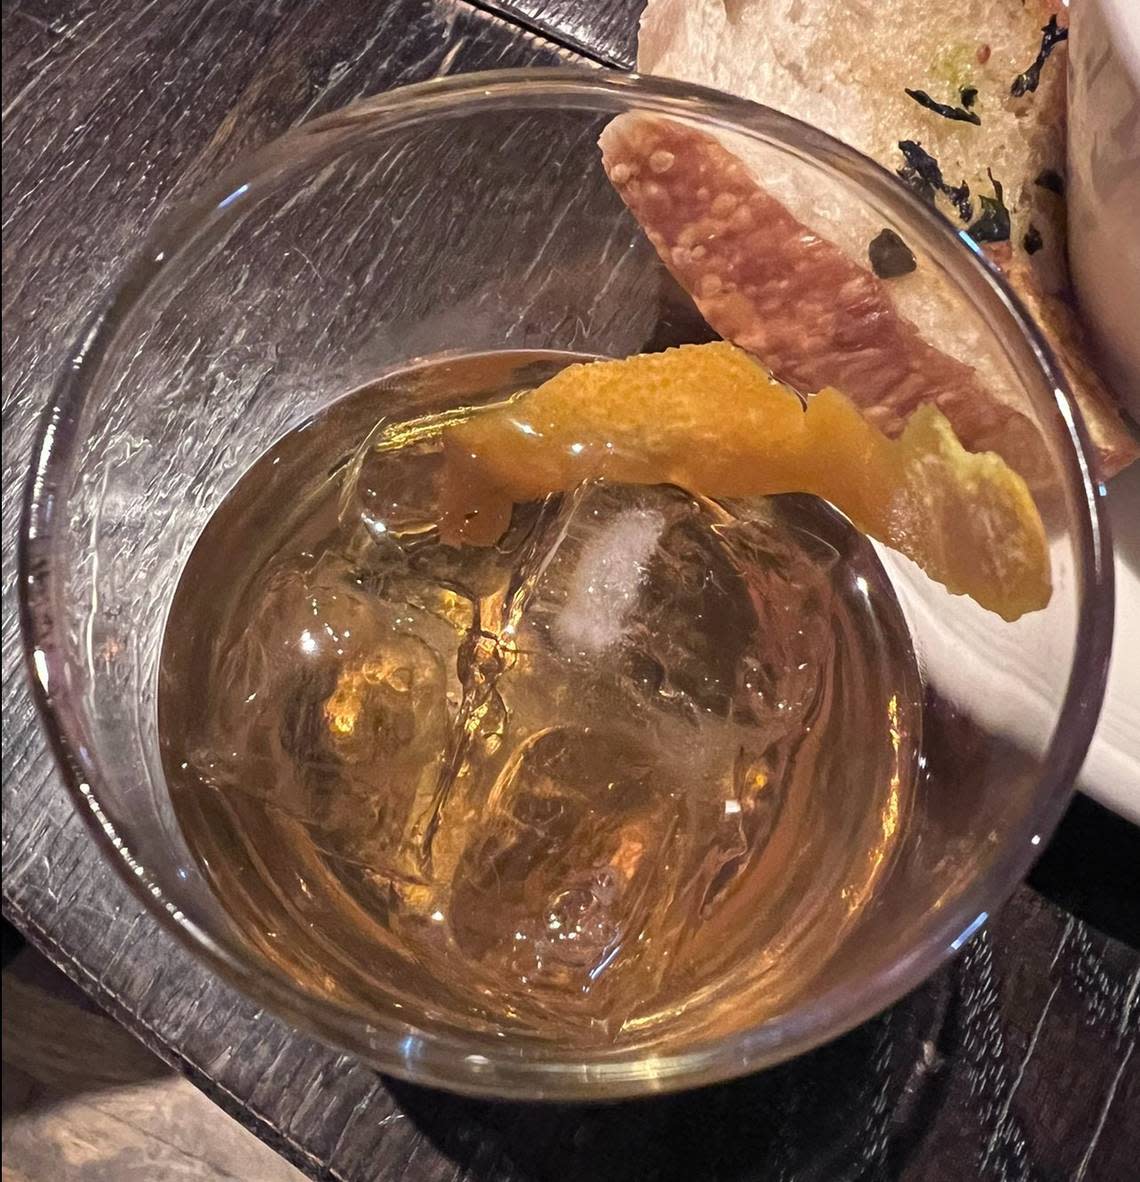 A classic old fashion bourbon at the Thirsty Fox, during the Bites of the Bluegrass walking food and history tour of downtown Lexington, Ky on March 21, 2024.